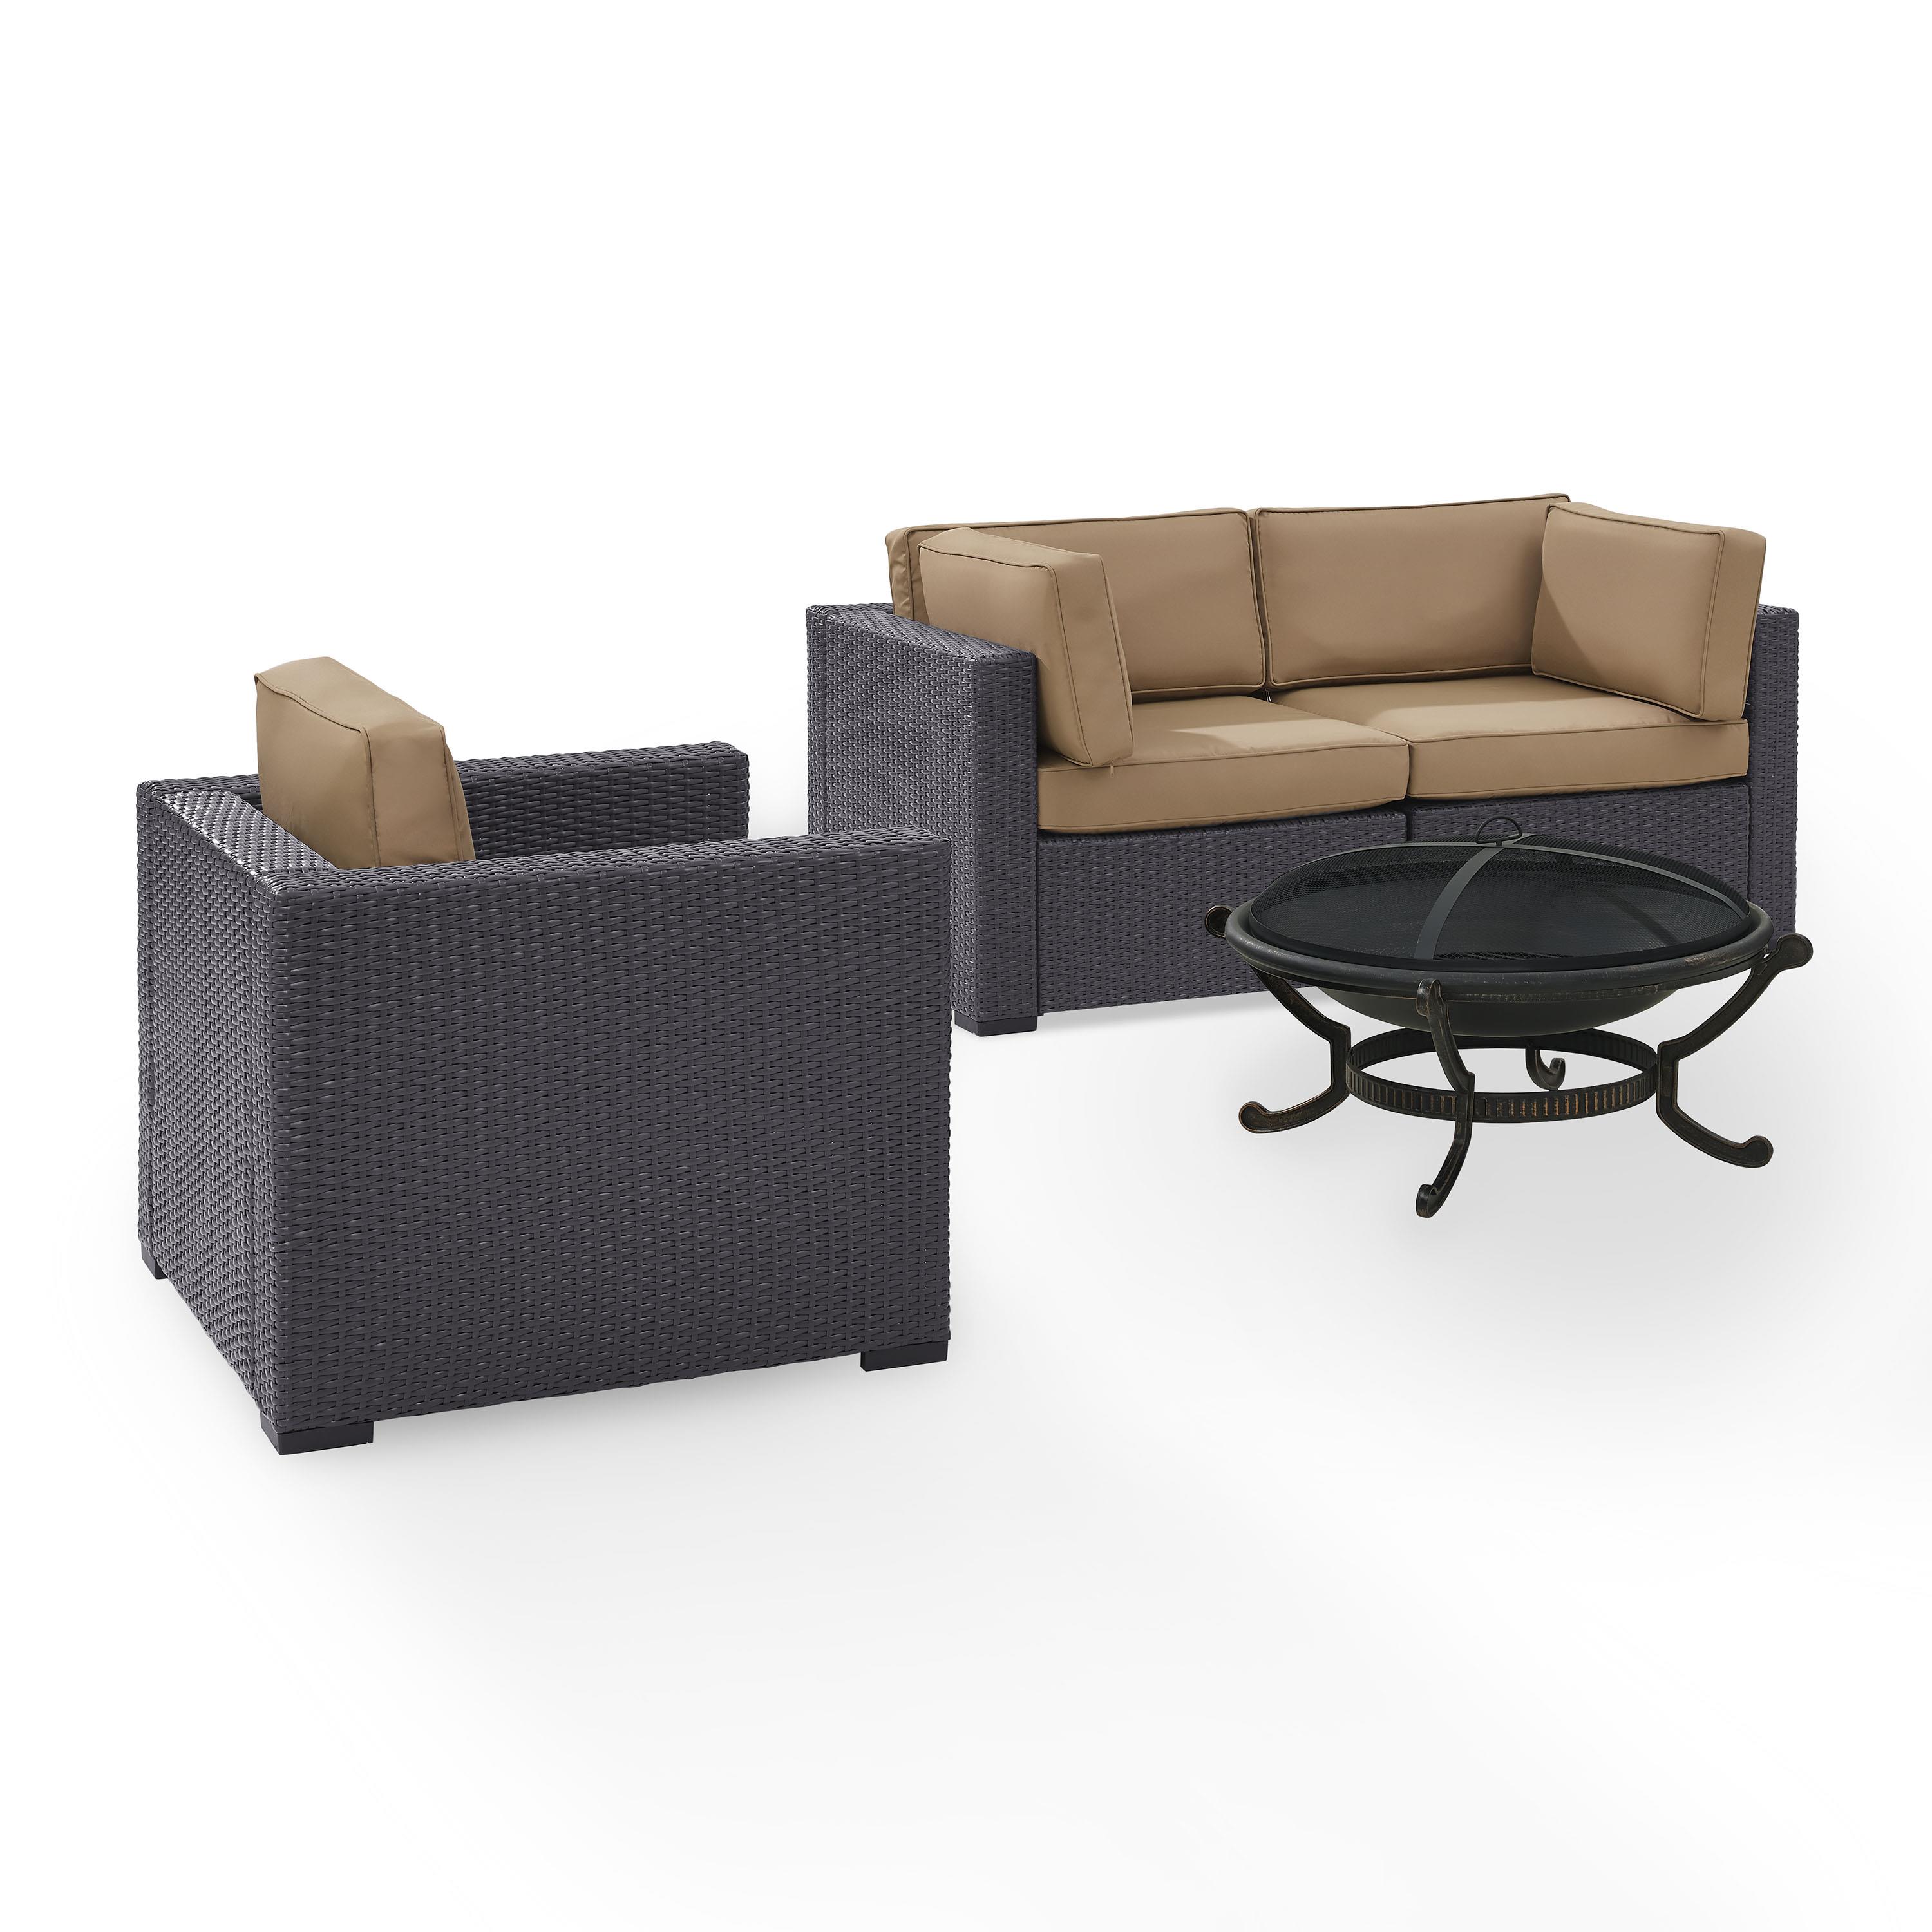 Biscayne 4Pc Outdoor Wicker Conversation Set W/Fire Pit Mocha/Brown - Armchair, Ashland Firepit, & 2 Corner Chairs - image 2 of 4